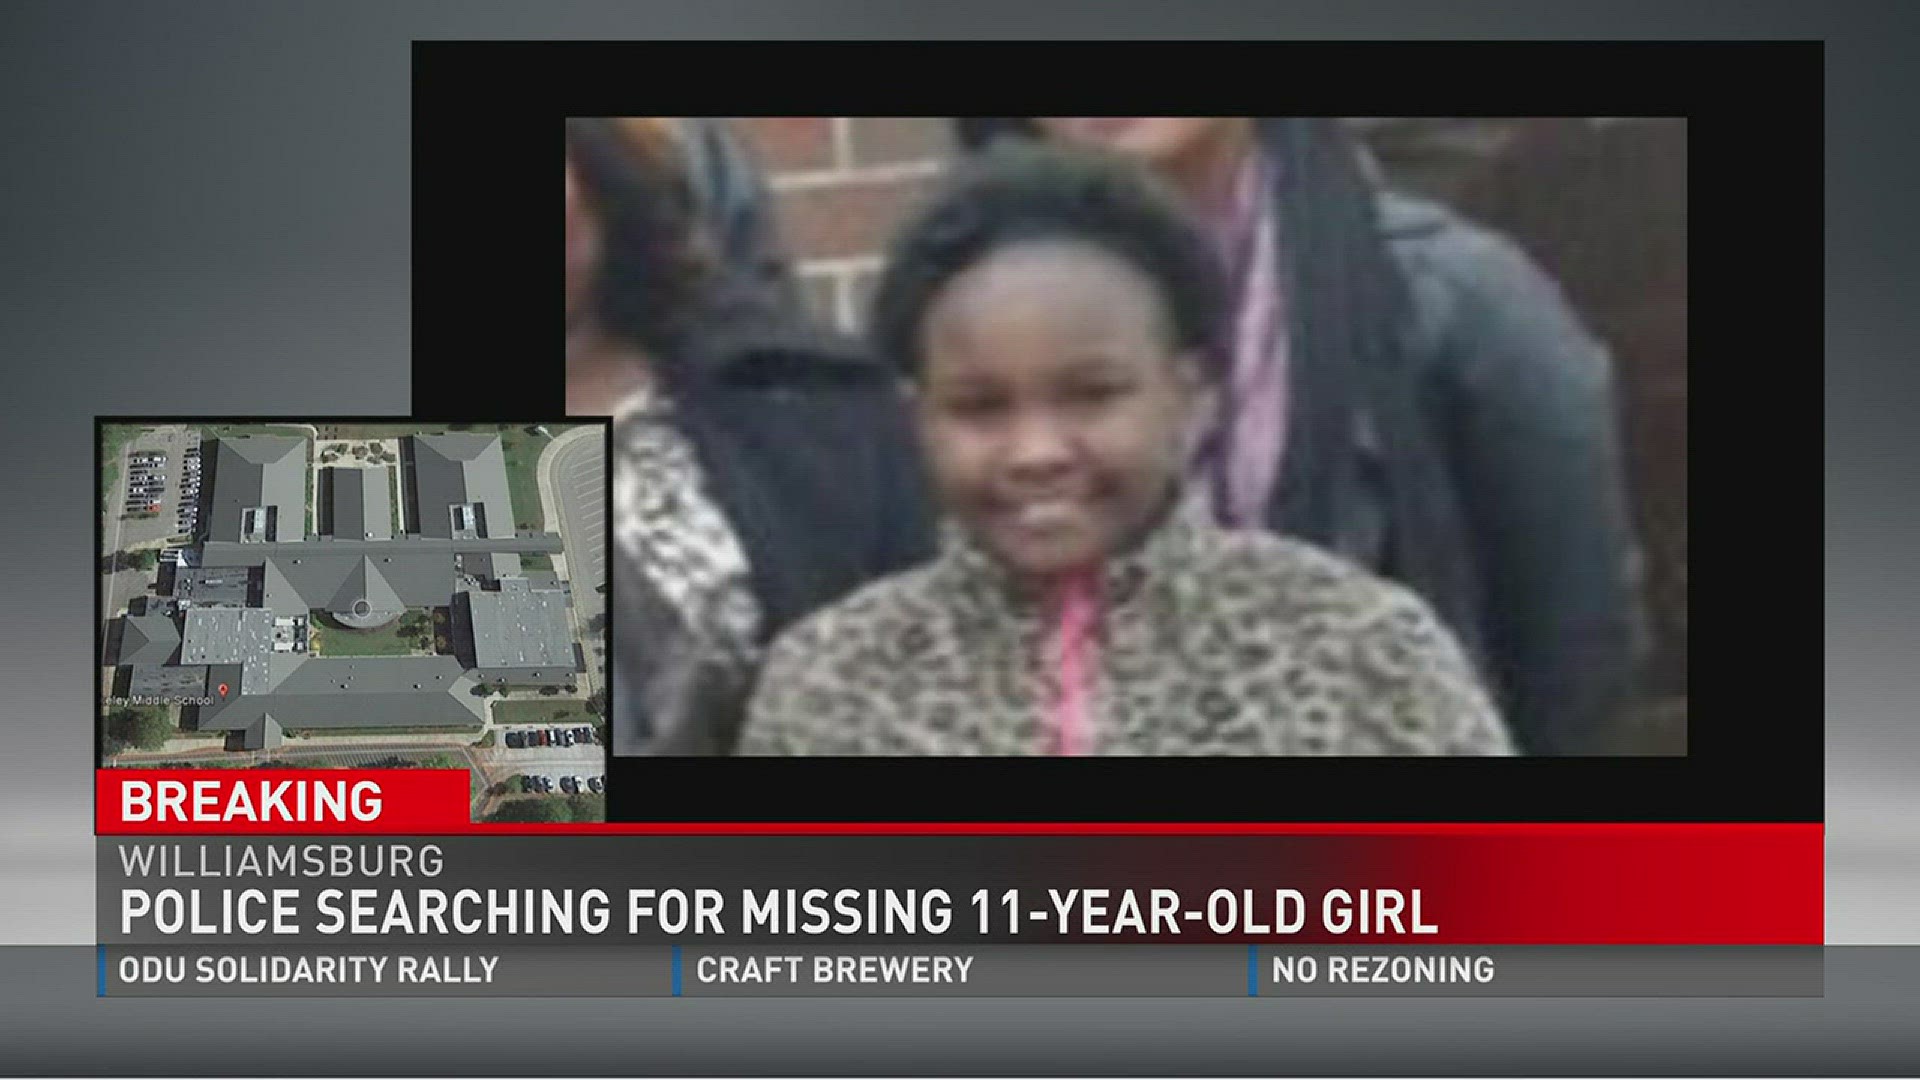 Missing 11-year-old has been found safe